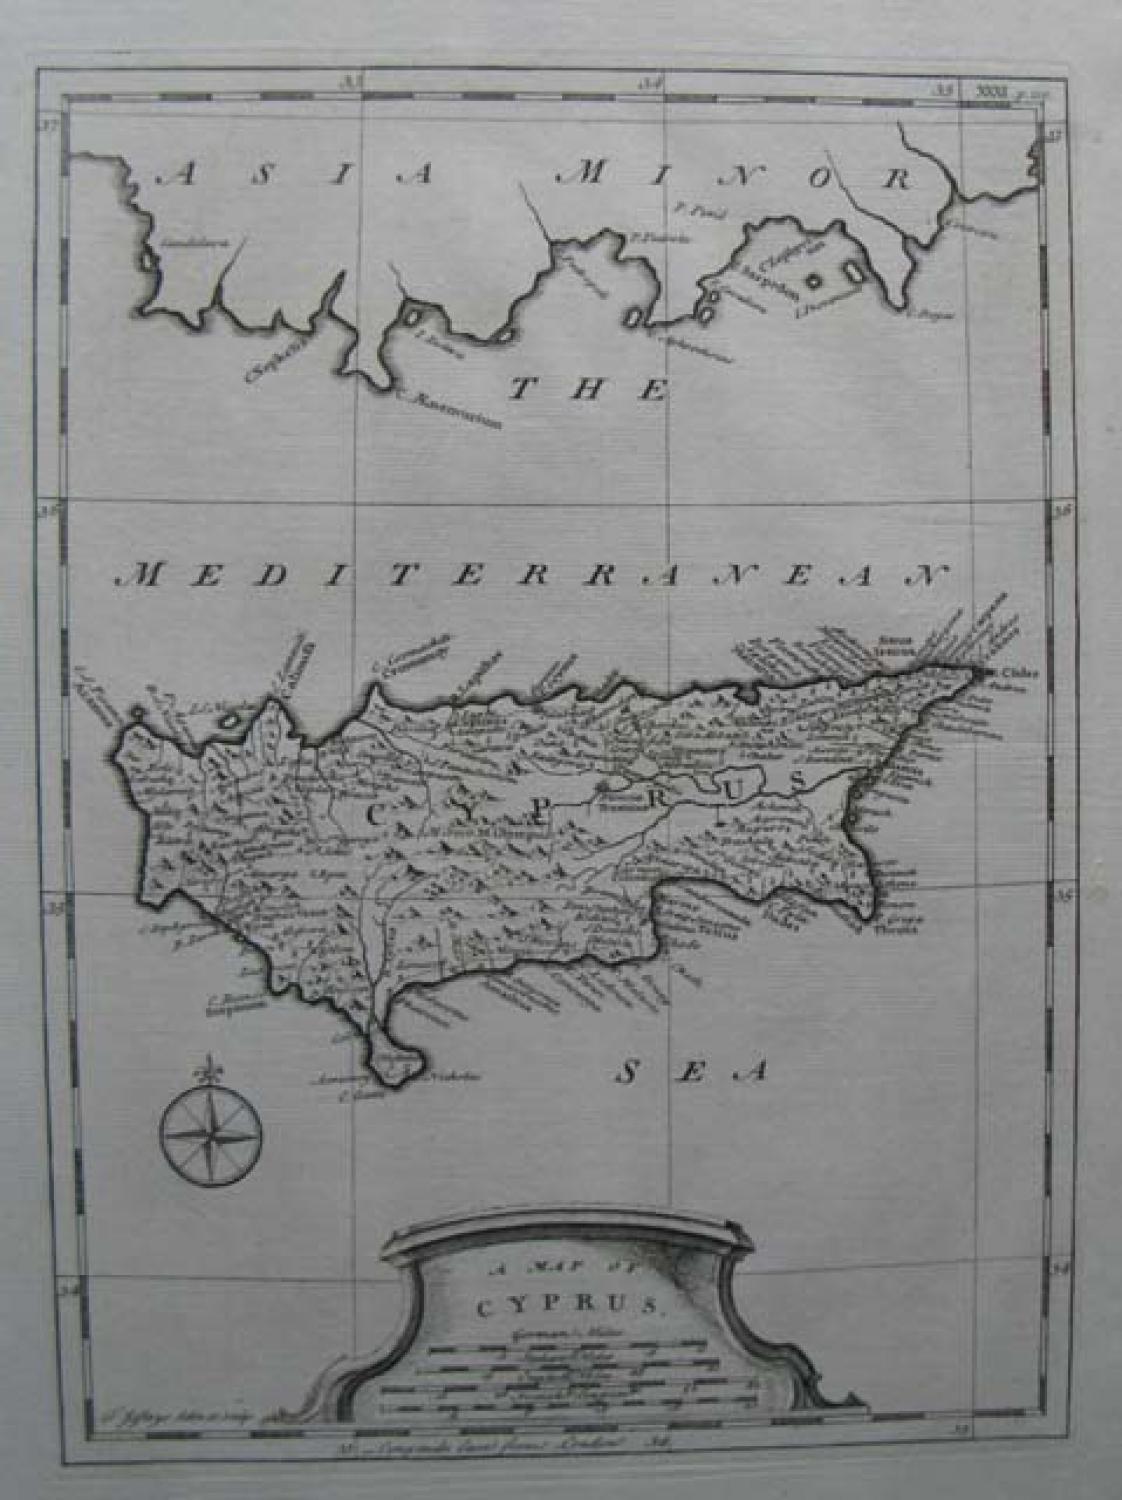 Jeffreys - A Map Of Cyprus